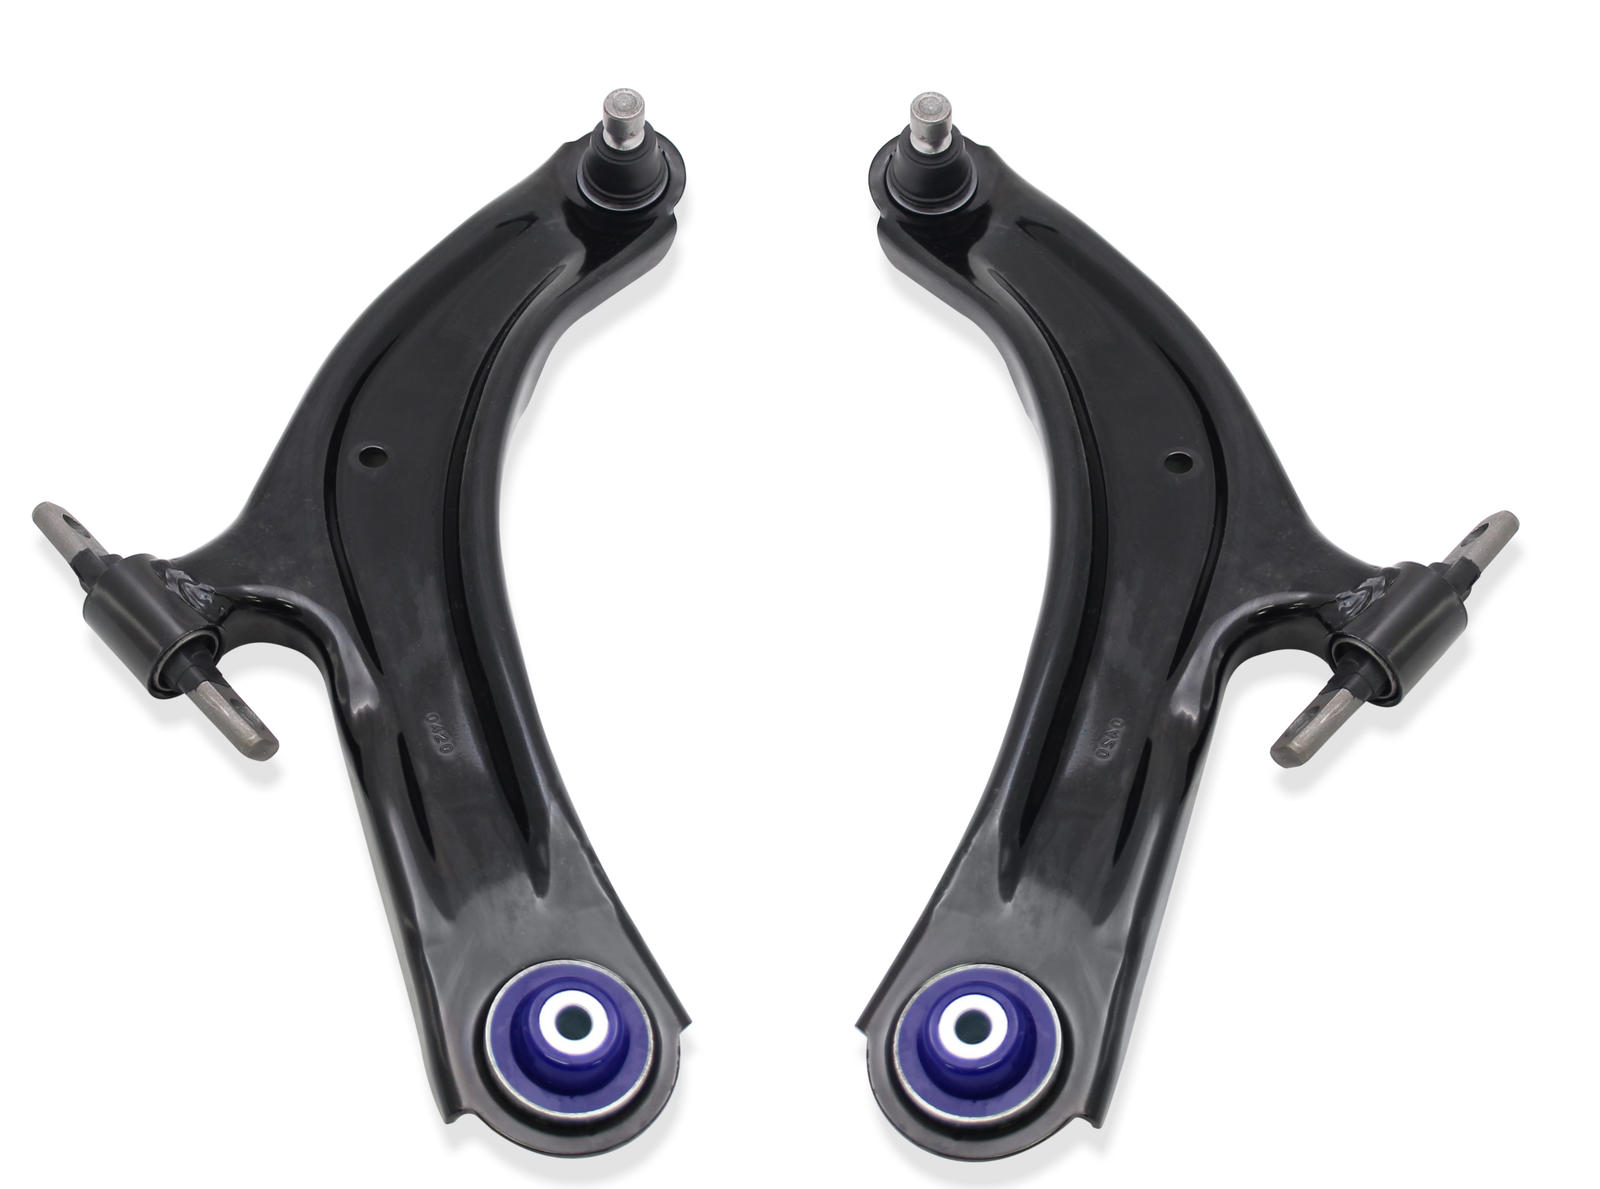 Front Lower Control Arm Kit including Ball Joints to suit Nissan X-Trail & Dualis, Renault Koleos